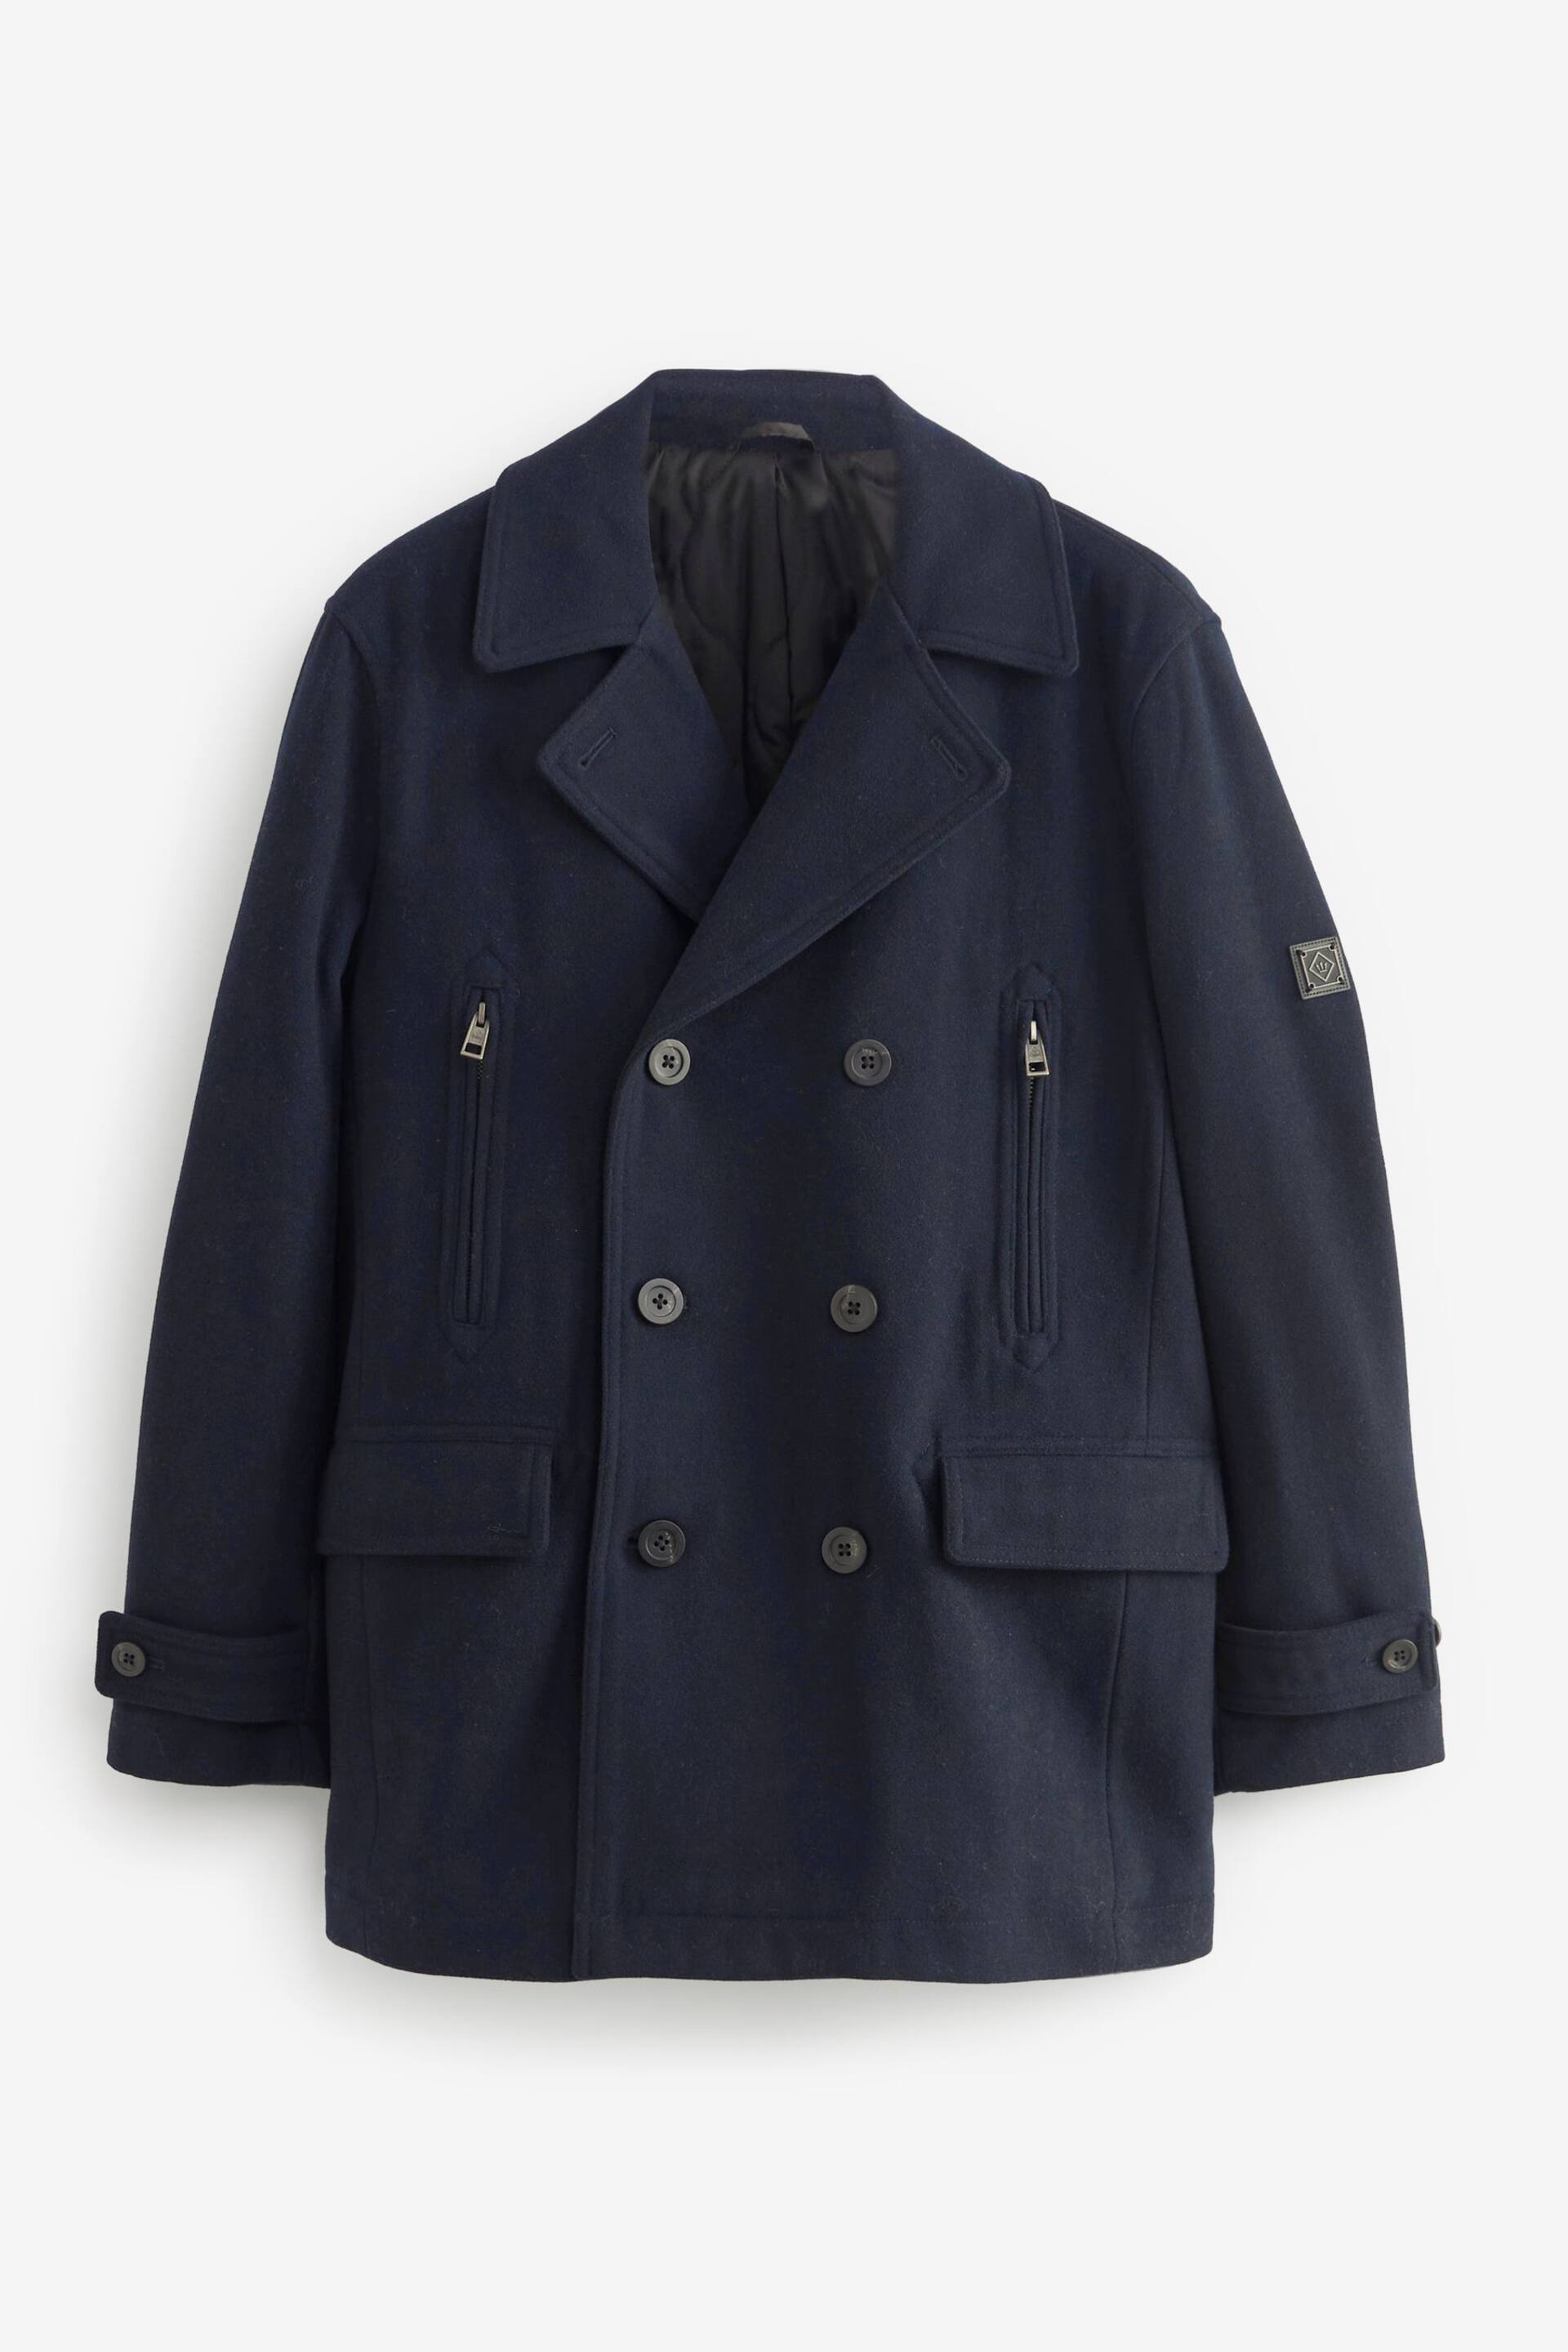 Navy Blue Wool Rich Double Breasted Peacoat - Image 8 of 12